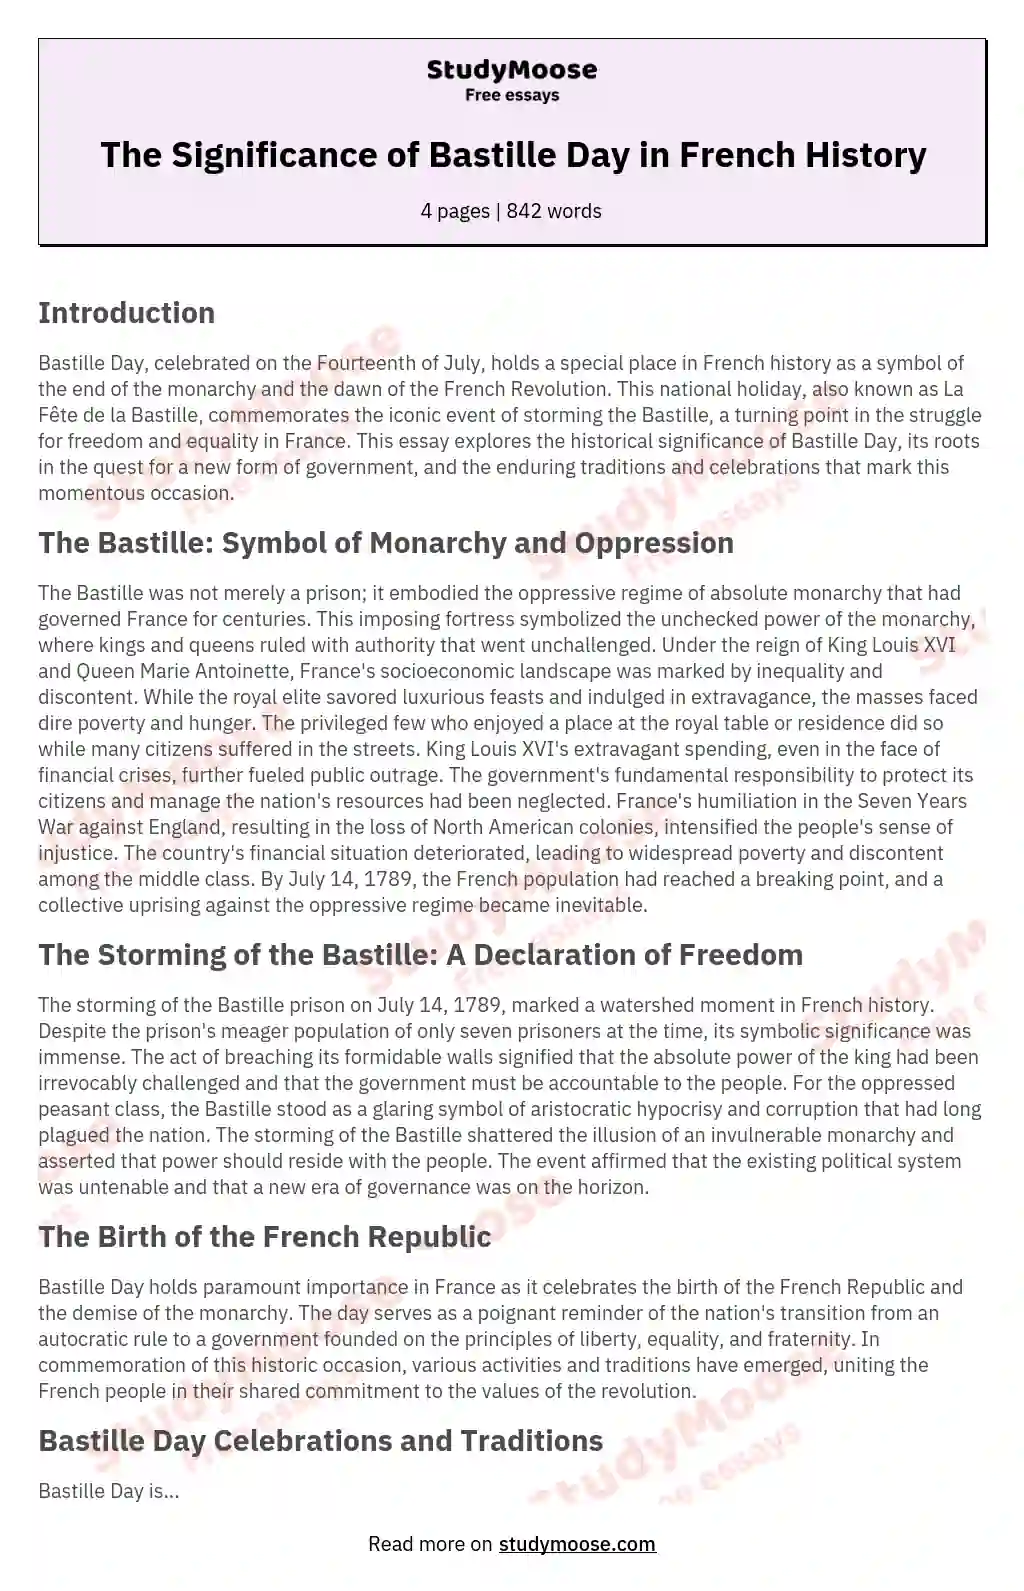 The Significance of Bastille Day in French History essay